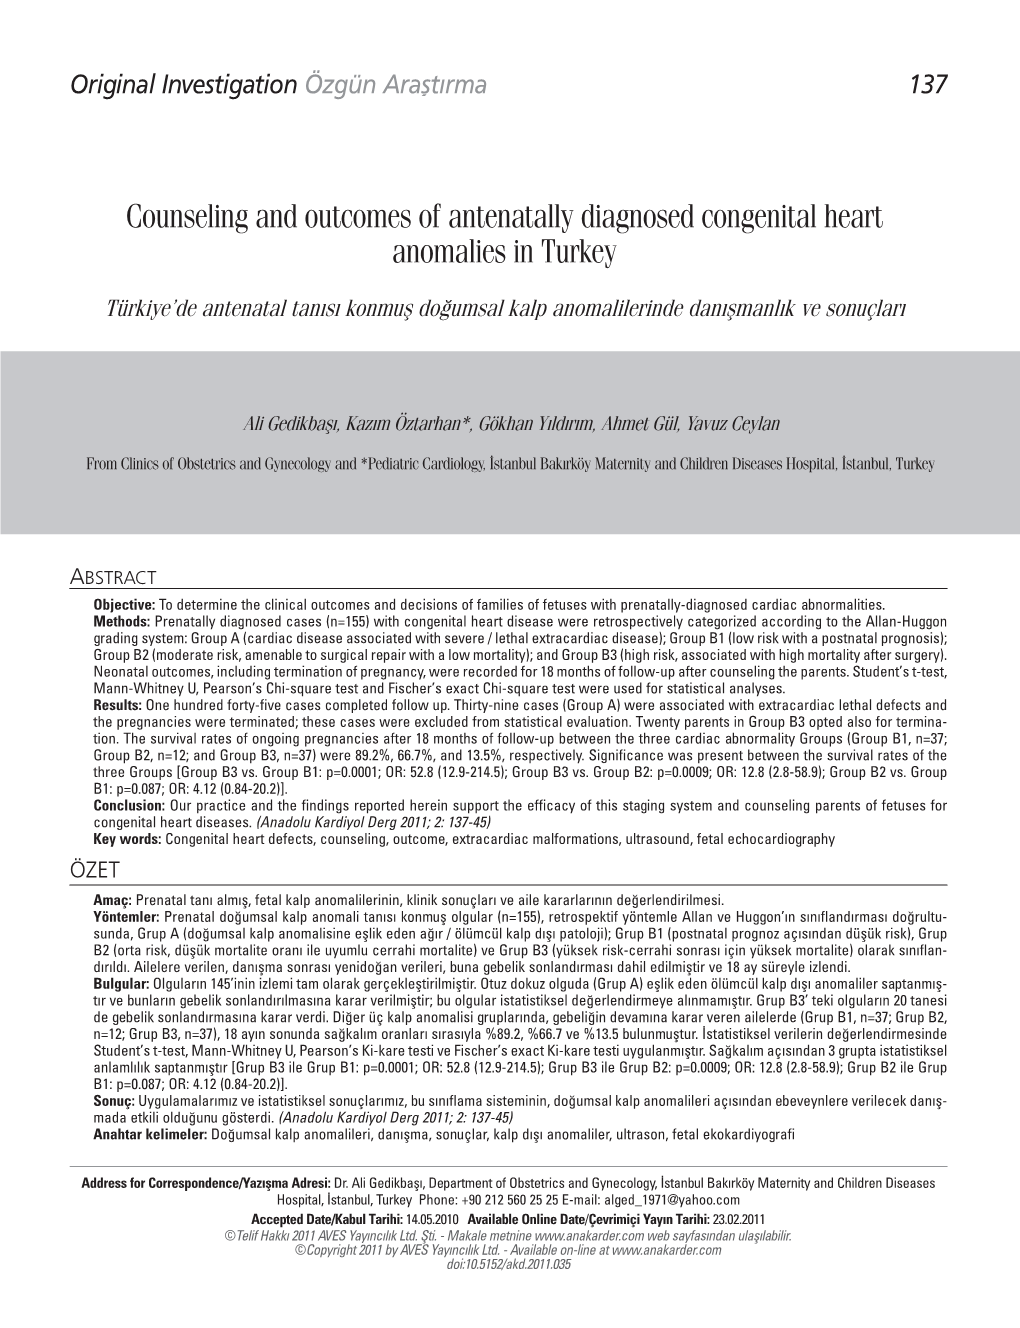 Counseling and Outcomes of Antenatally Diagnosed Congenital Heart Anomalies in Turkey